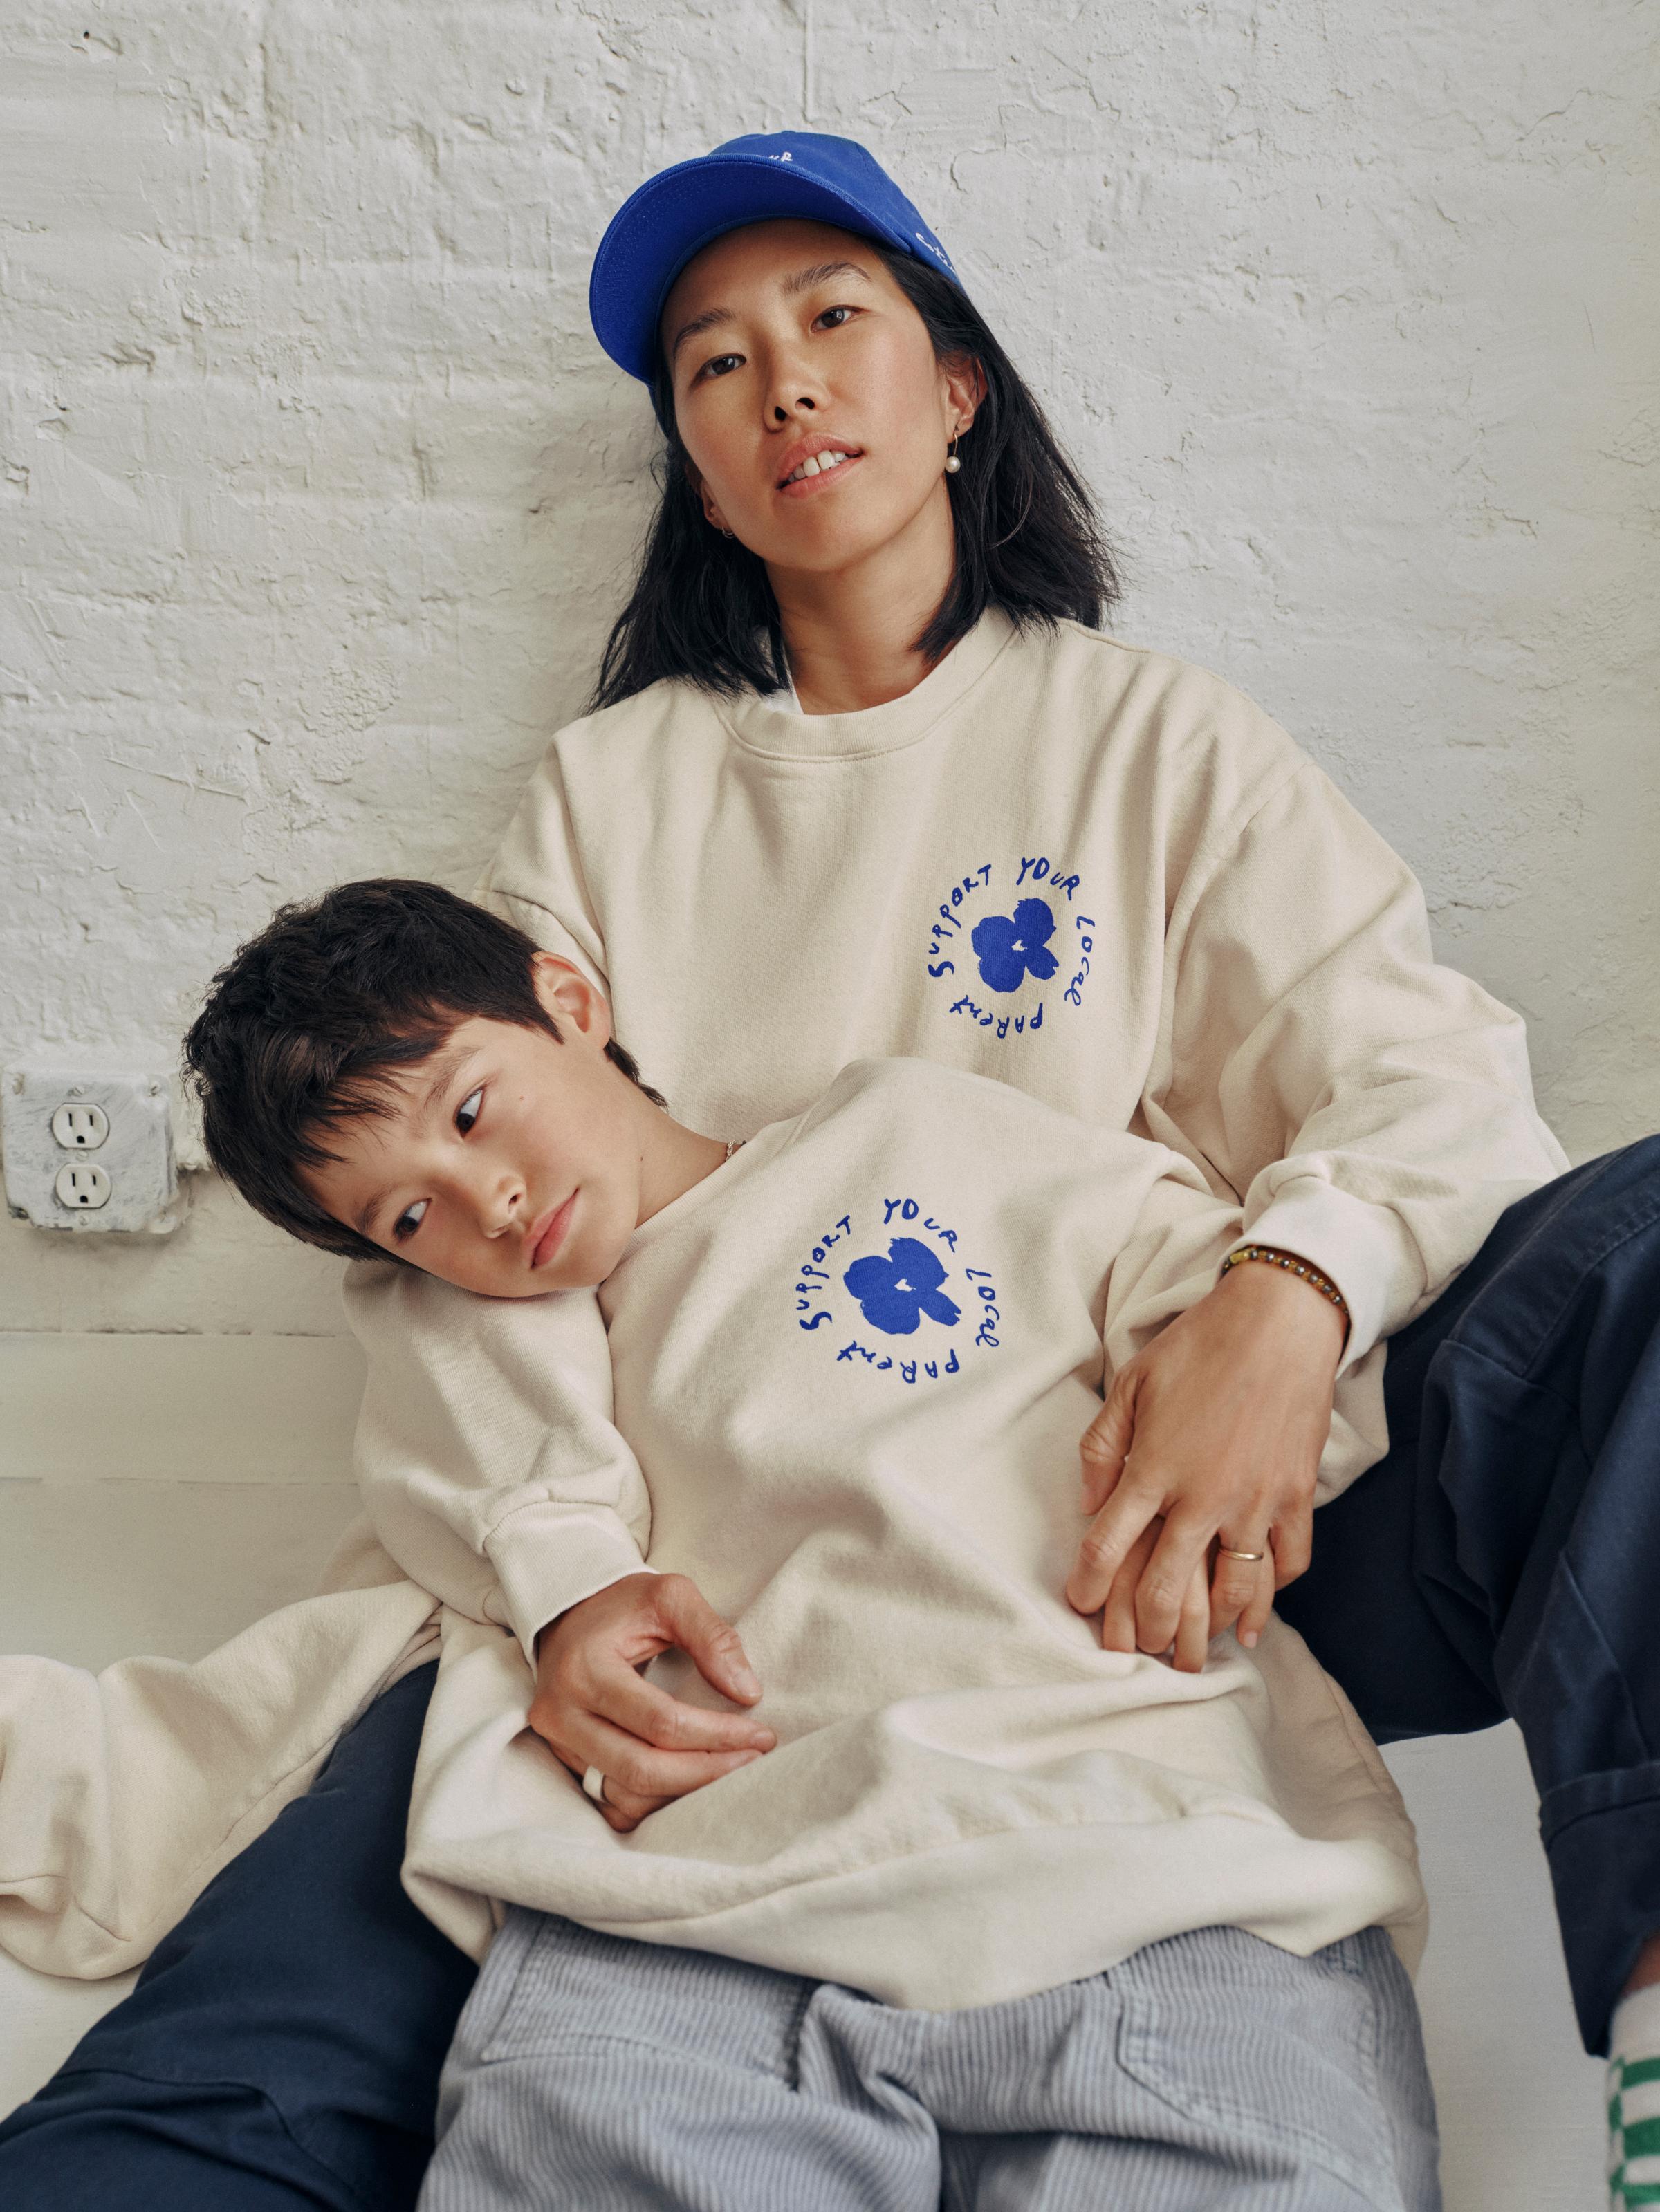 A mother and son both wearing the SYLP crewneck.